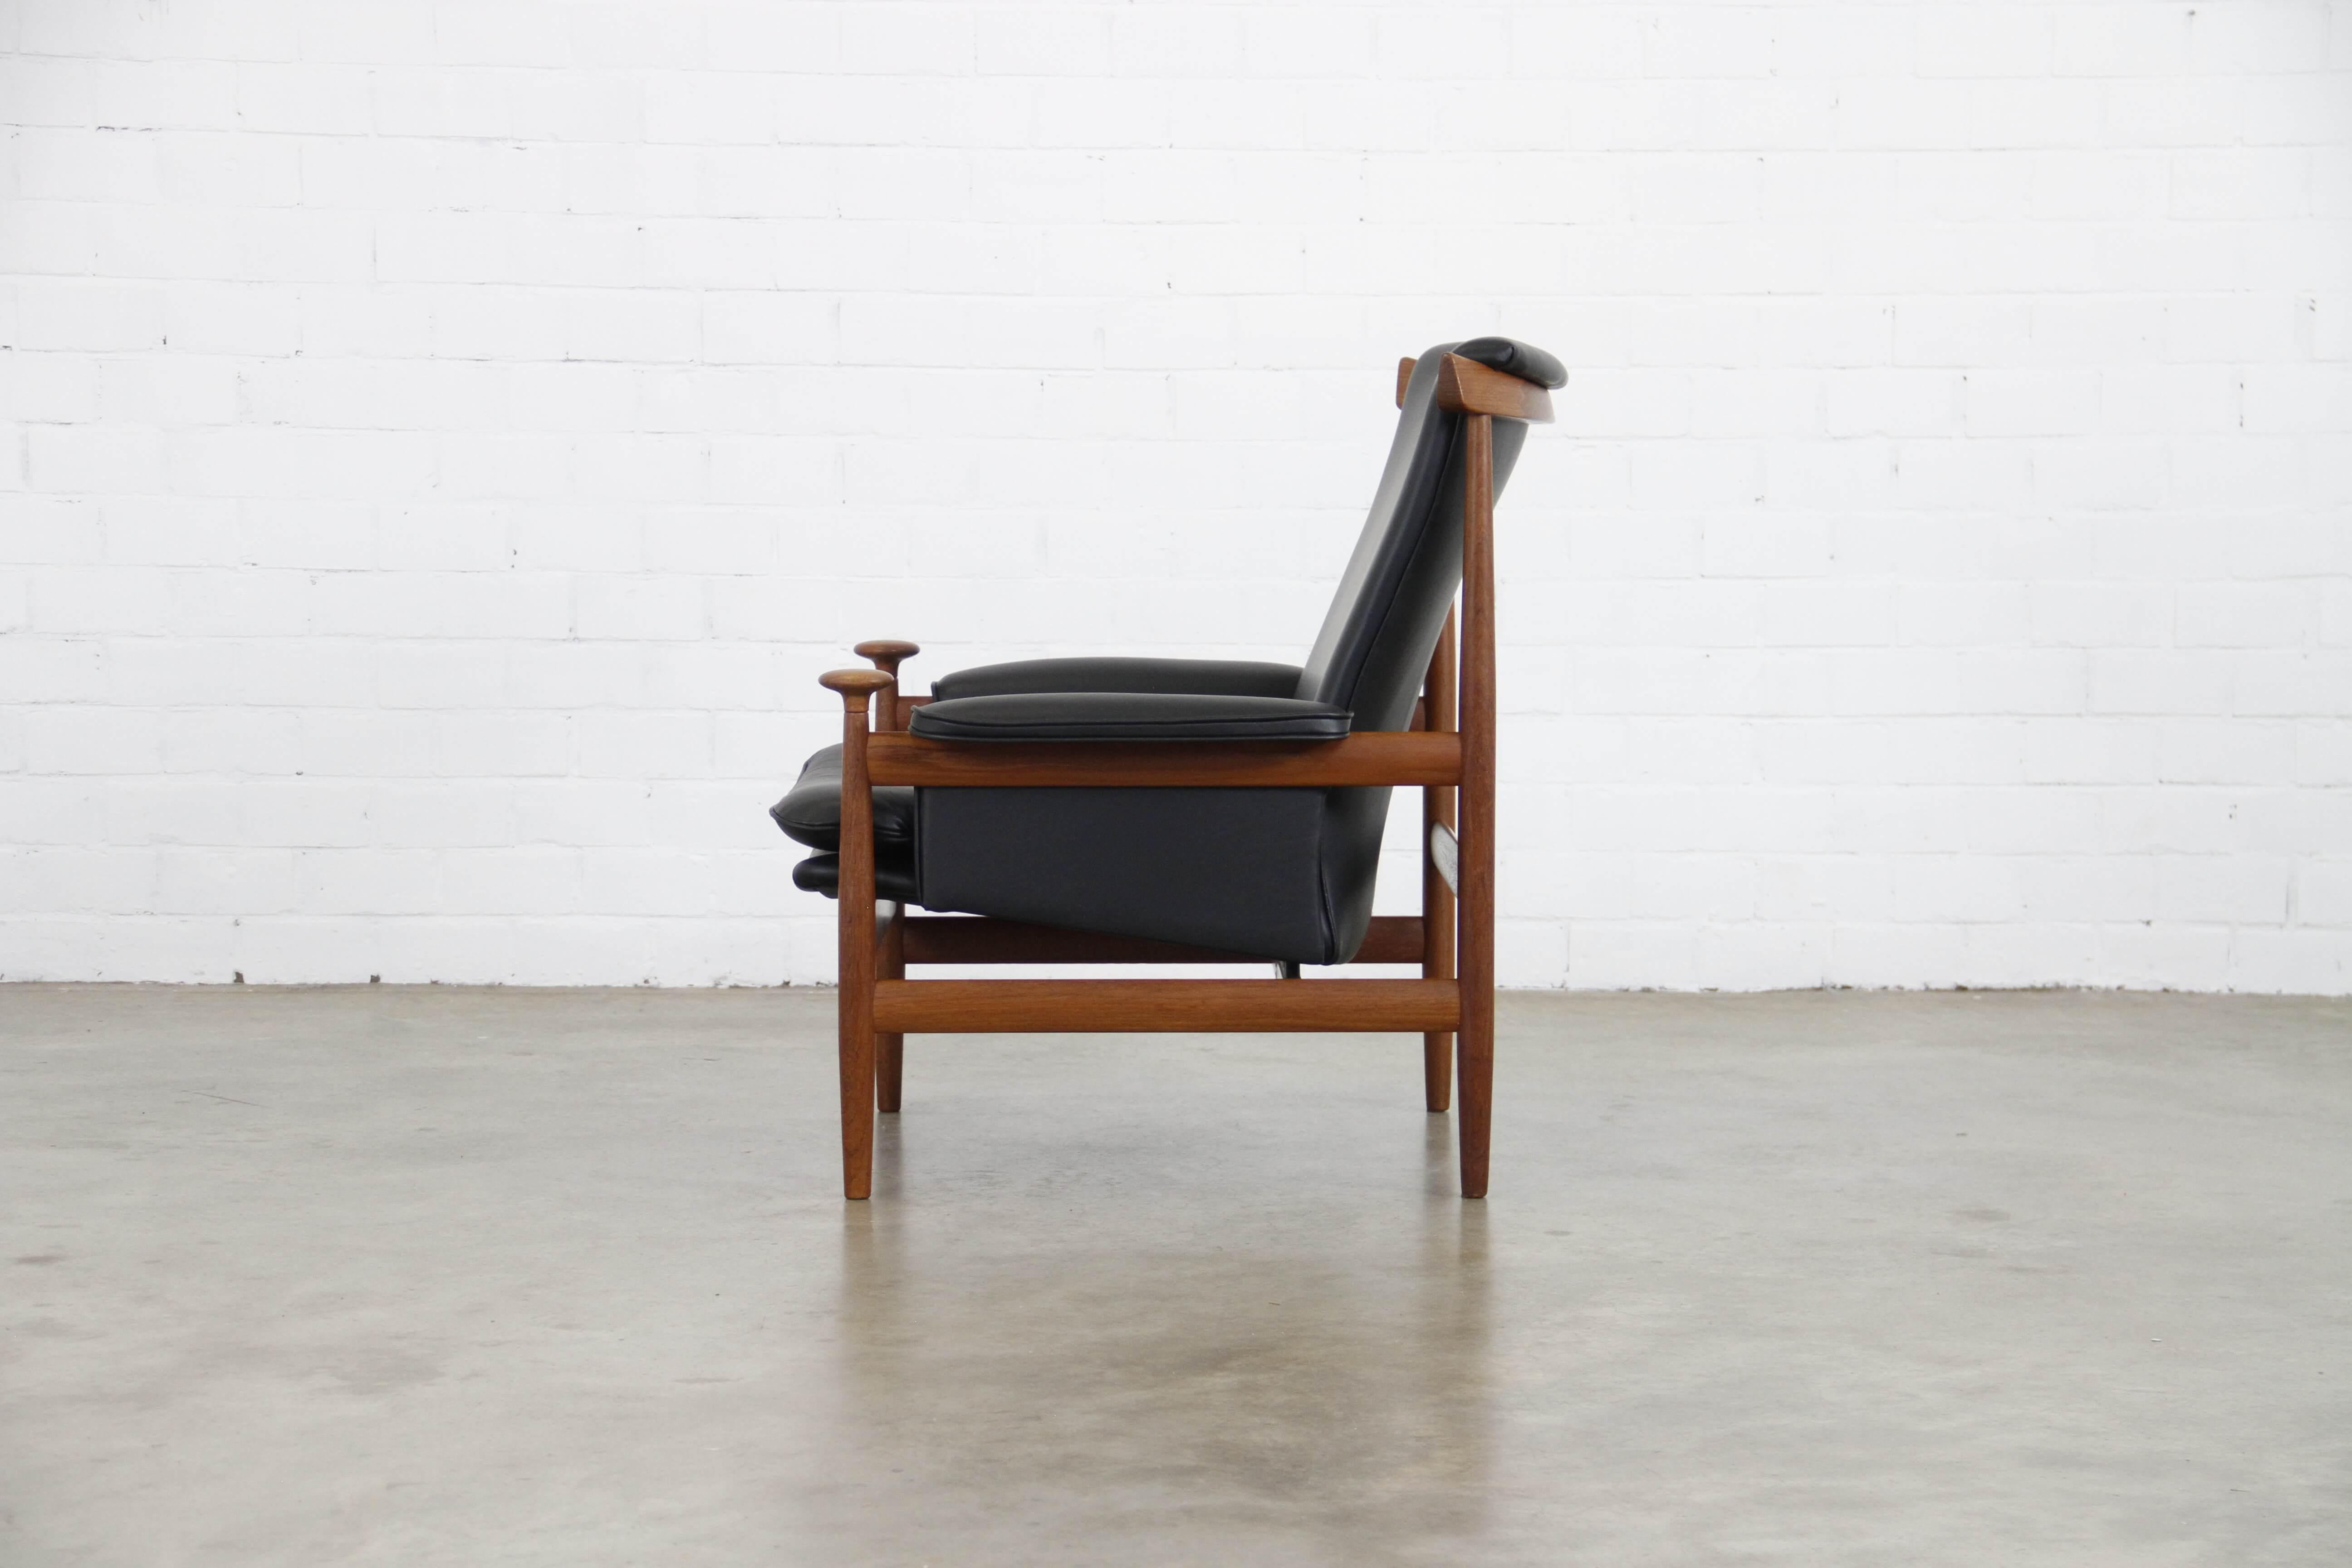 20th Century Danish Leather and Teak Bwana Model 152 Chair by Finn Juhl for France & Søn 1962 For Sale